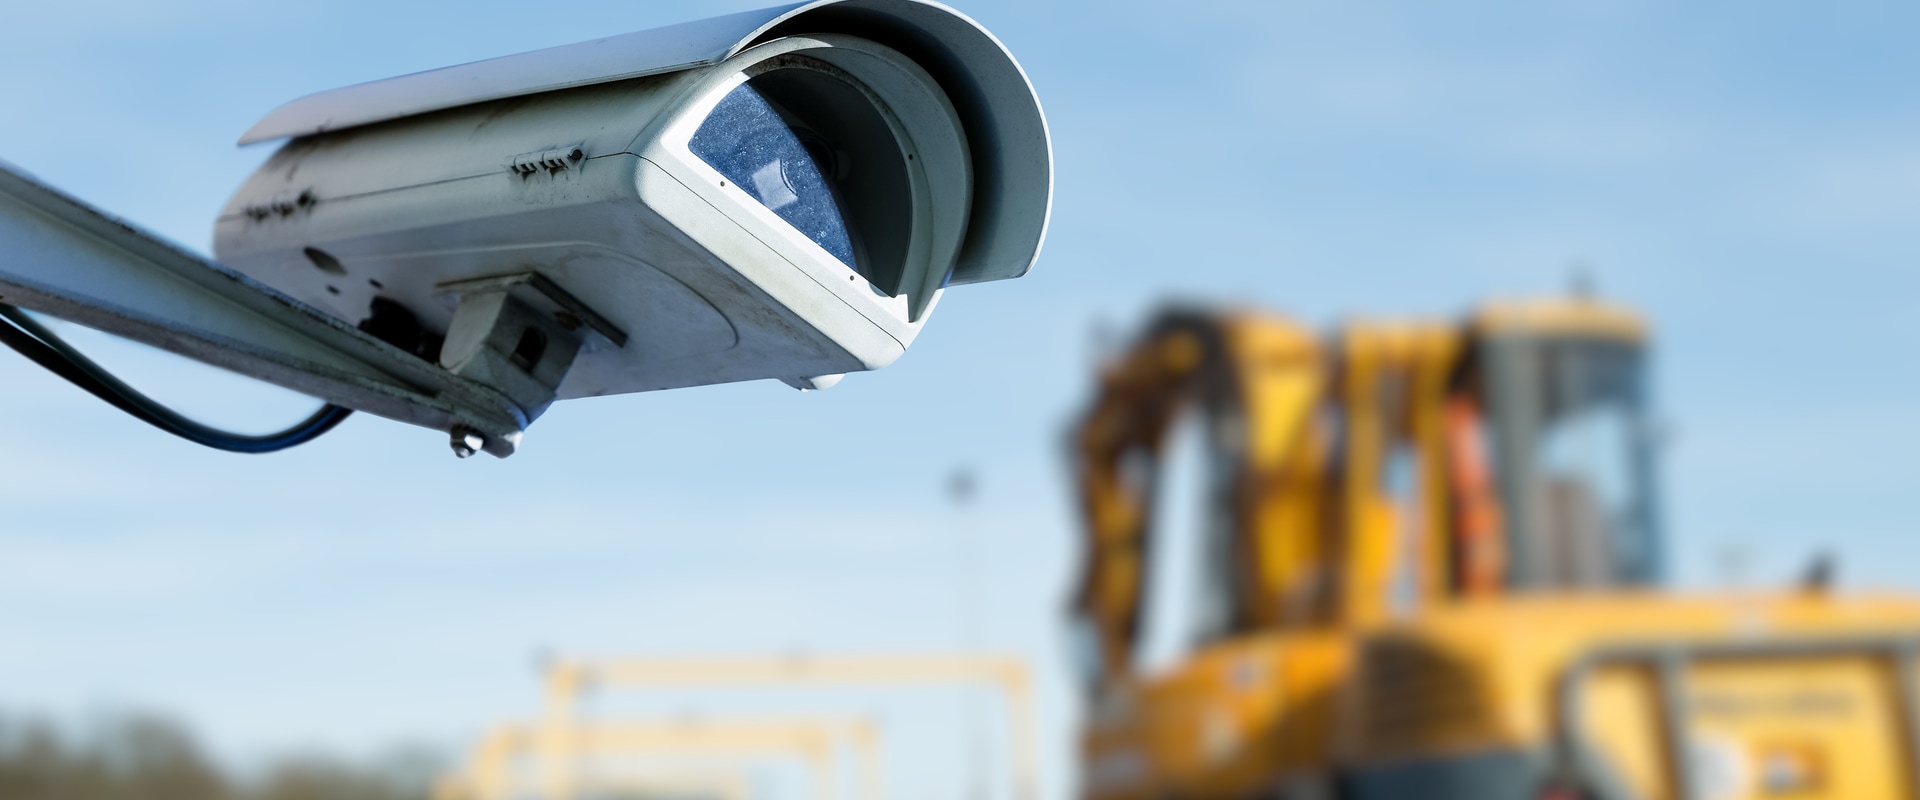 Protecting Your Construction Site With Security Cameras